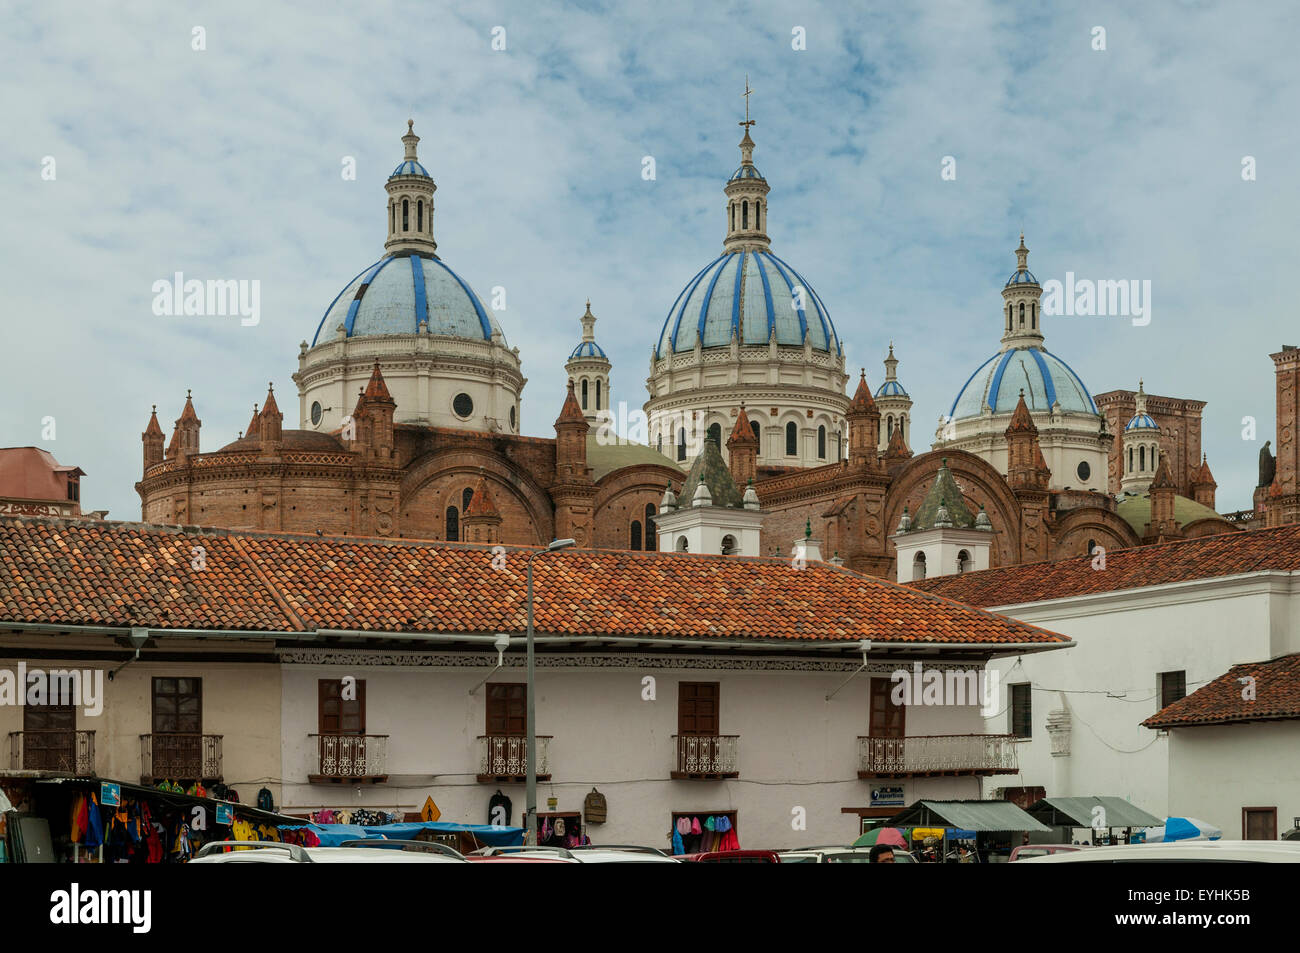 Domes of the New Cathedral, Cuenca, Ecuador Stock Photo